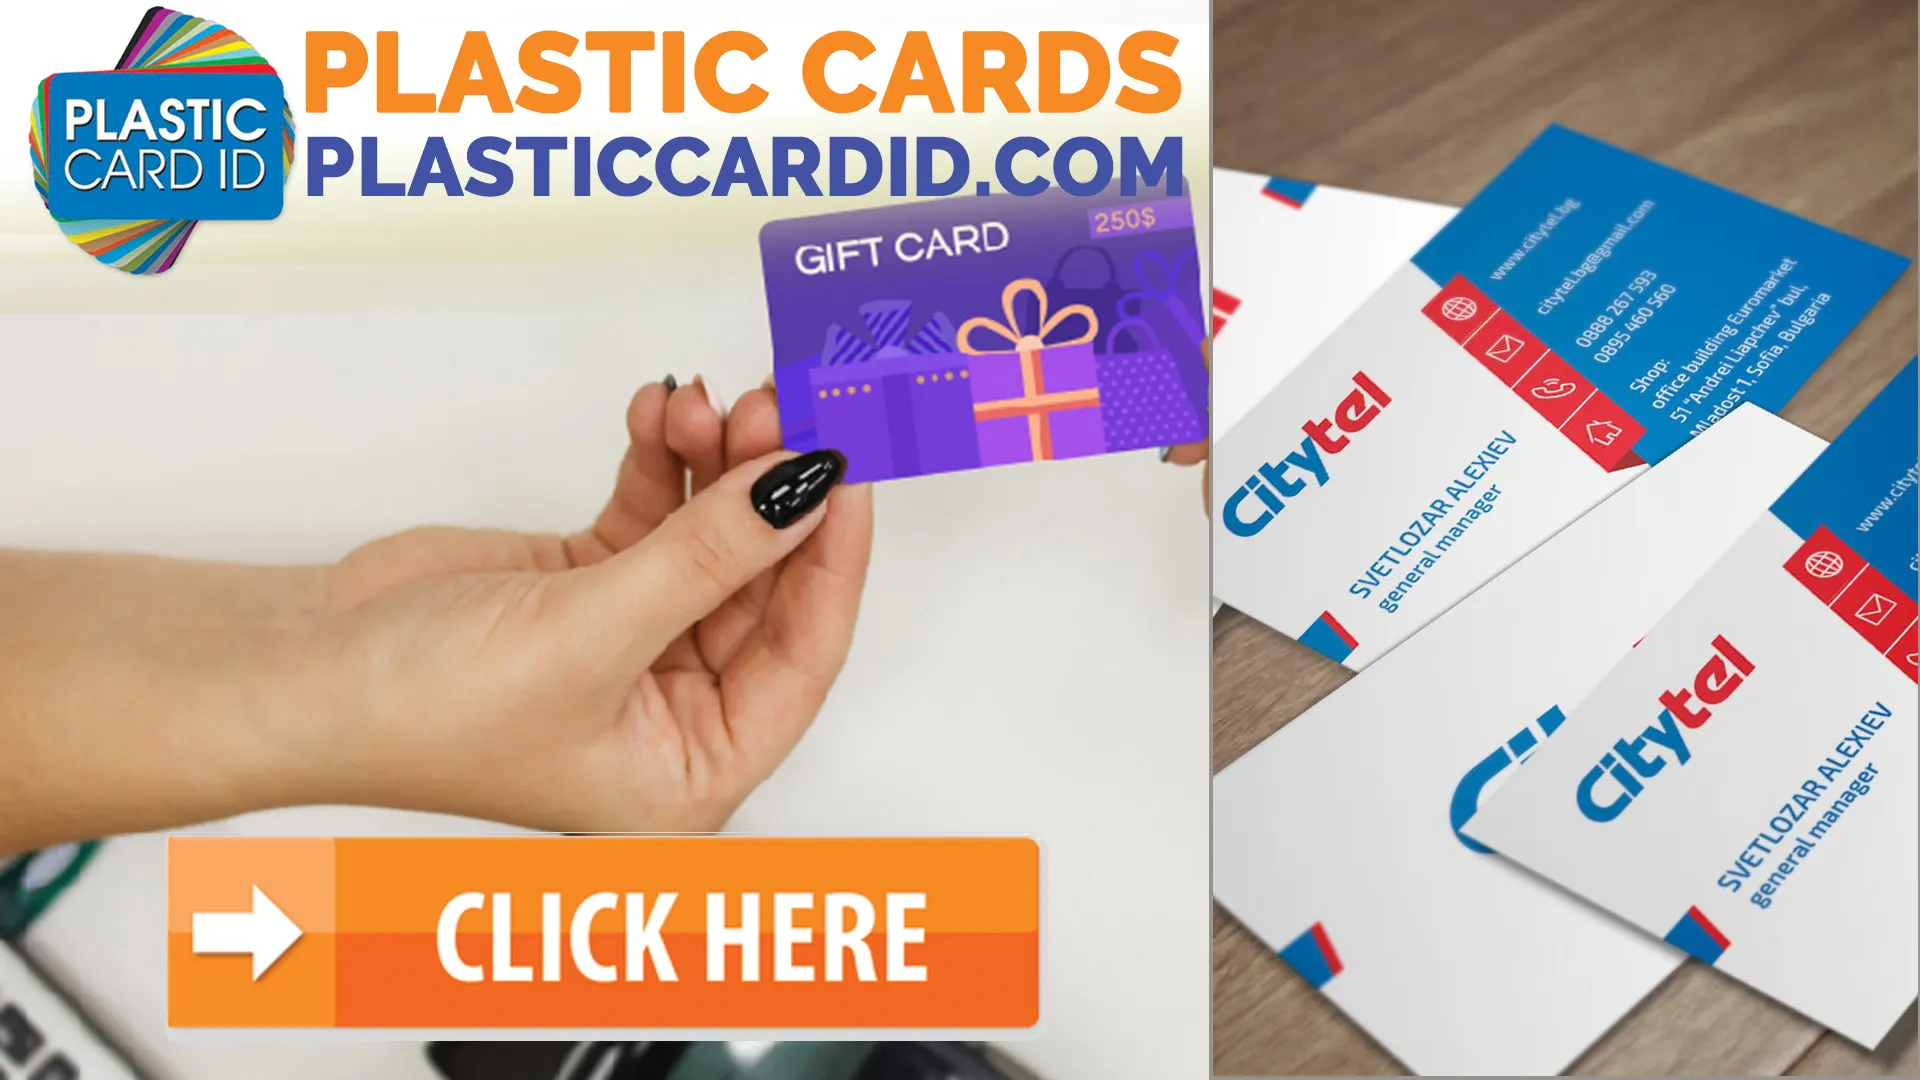 Welcome to the Edge of Innovation: Contactless Card Technology at Plastic Card ID




